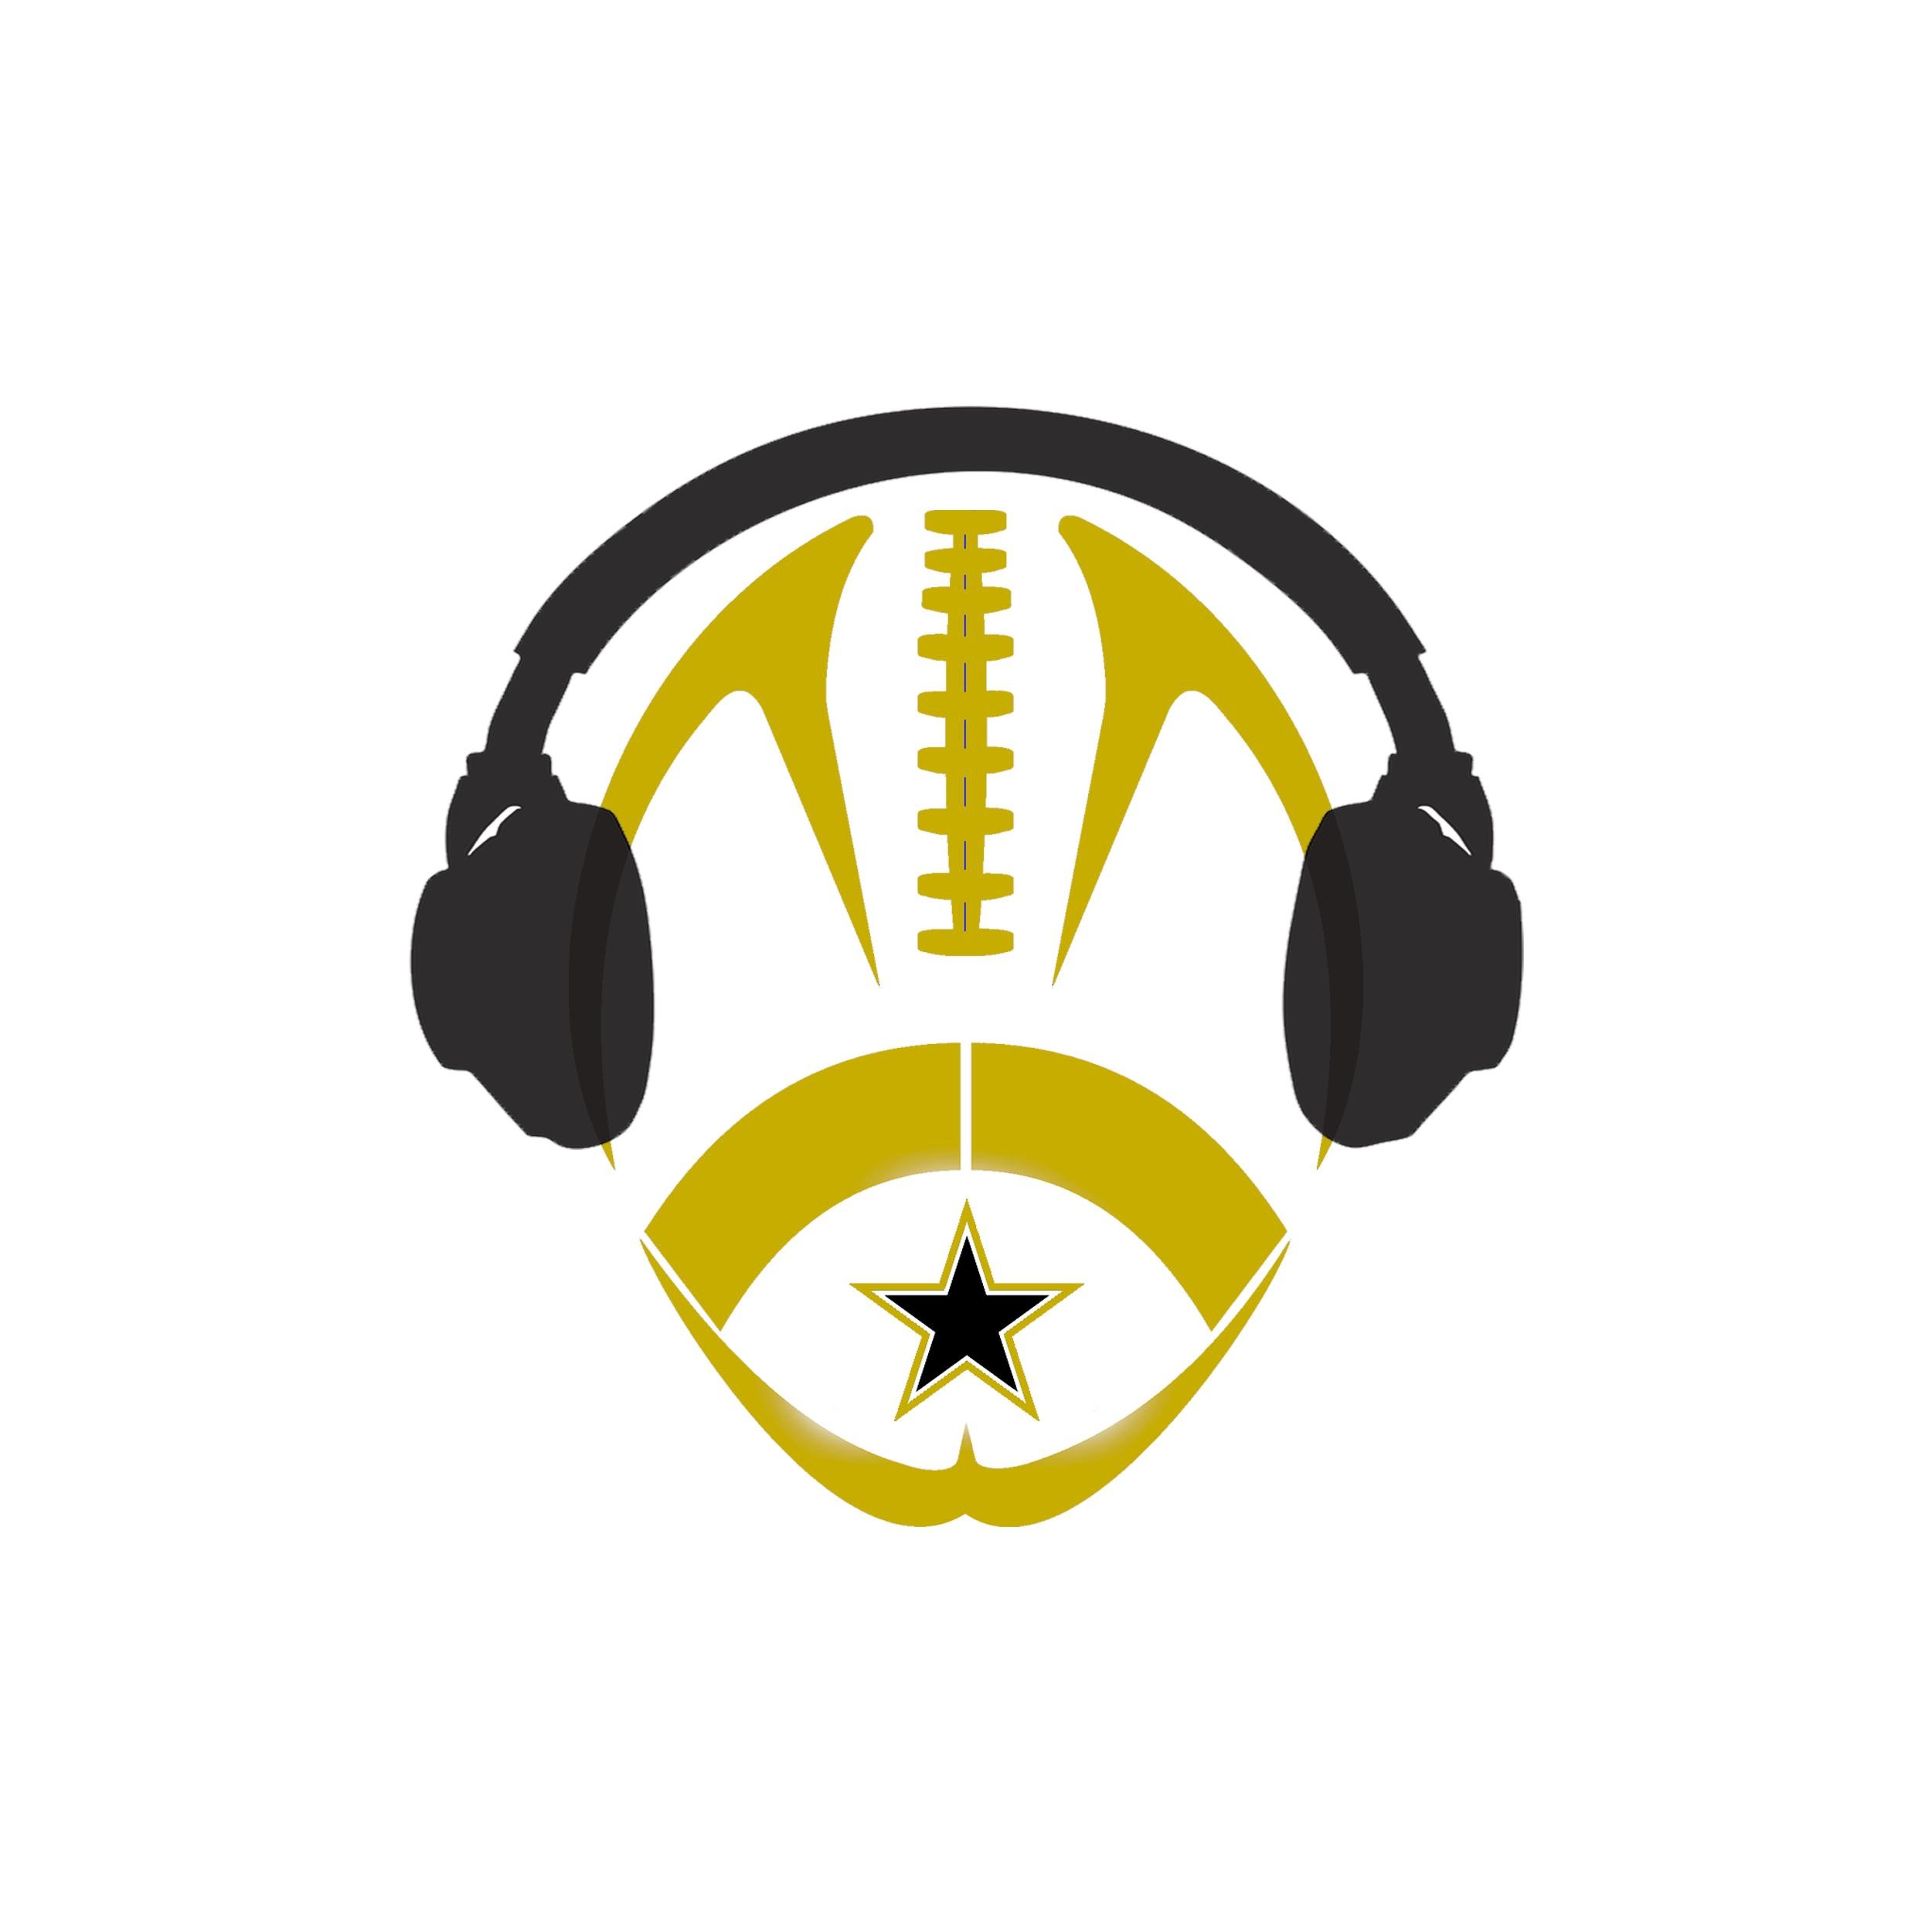 The only official voices of the Starfires. Weekly podcast for @southadamsfb. Supporters of @DidMoserWin. All views (in)directly represent South Adams HS